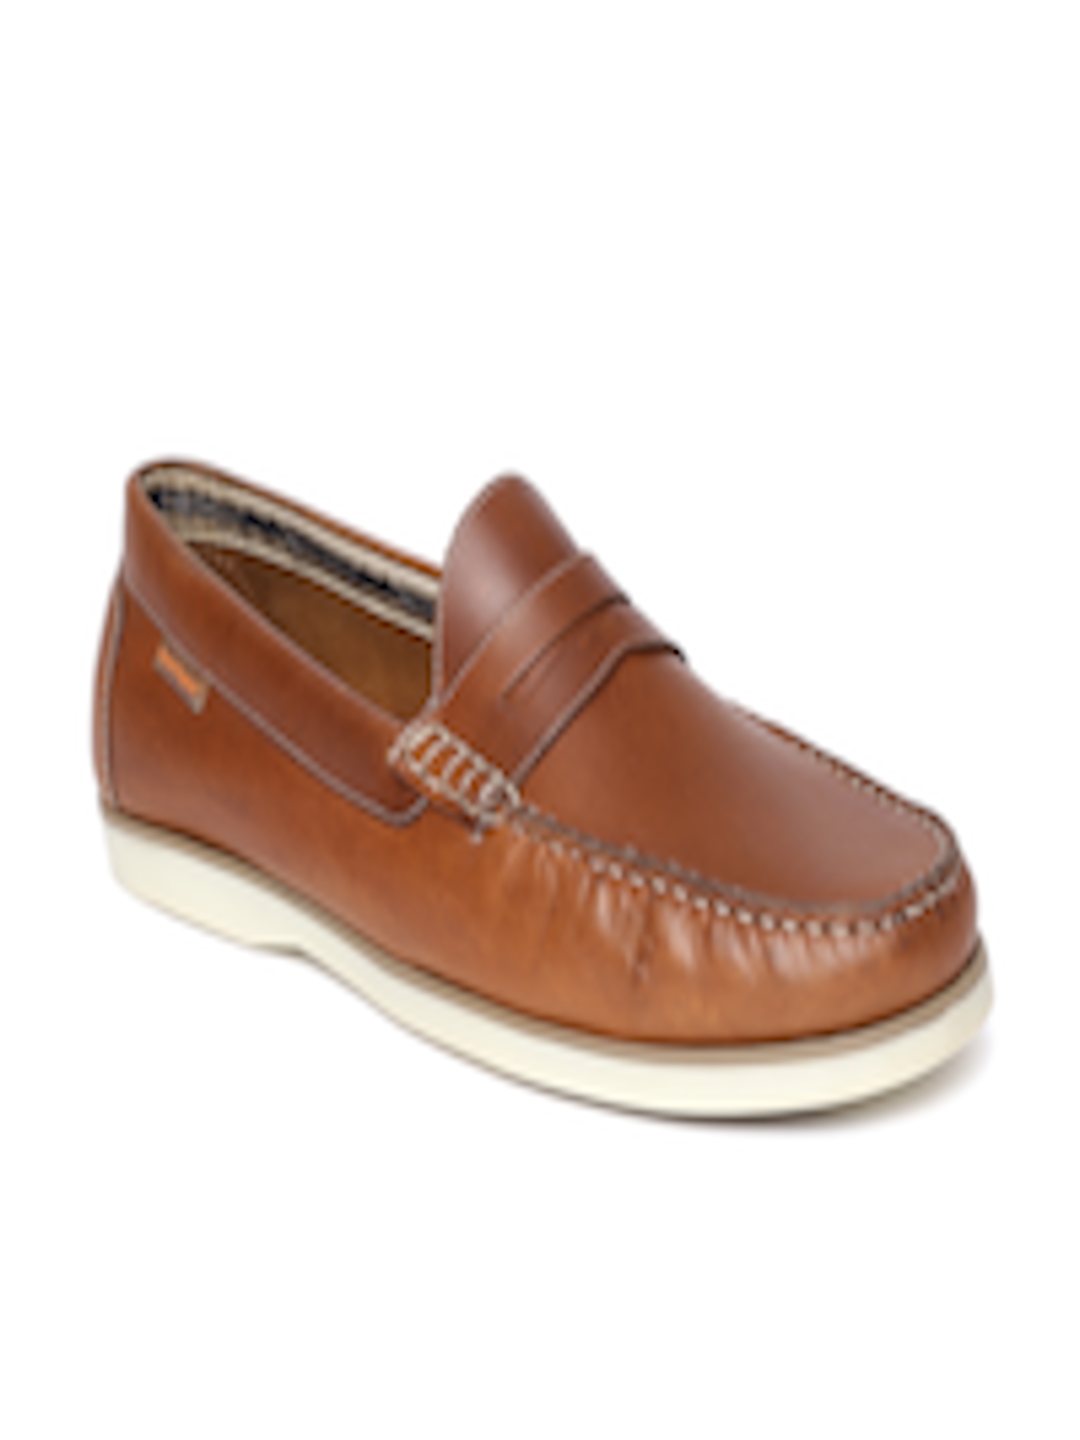 Buy Hush Puppies Men Tan Brown Loafers - Casual Shoes for Men 5802095 ...